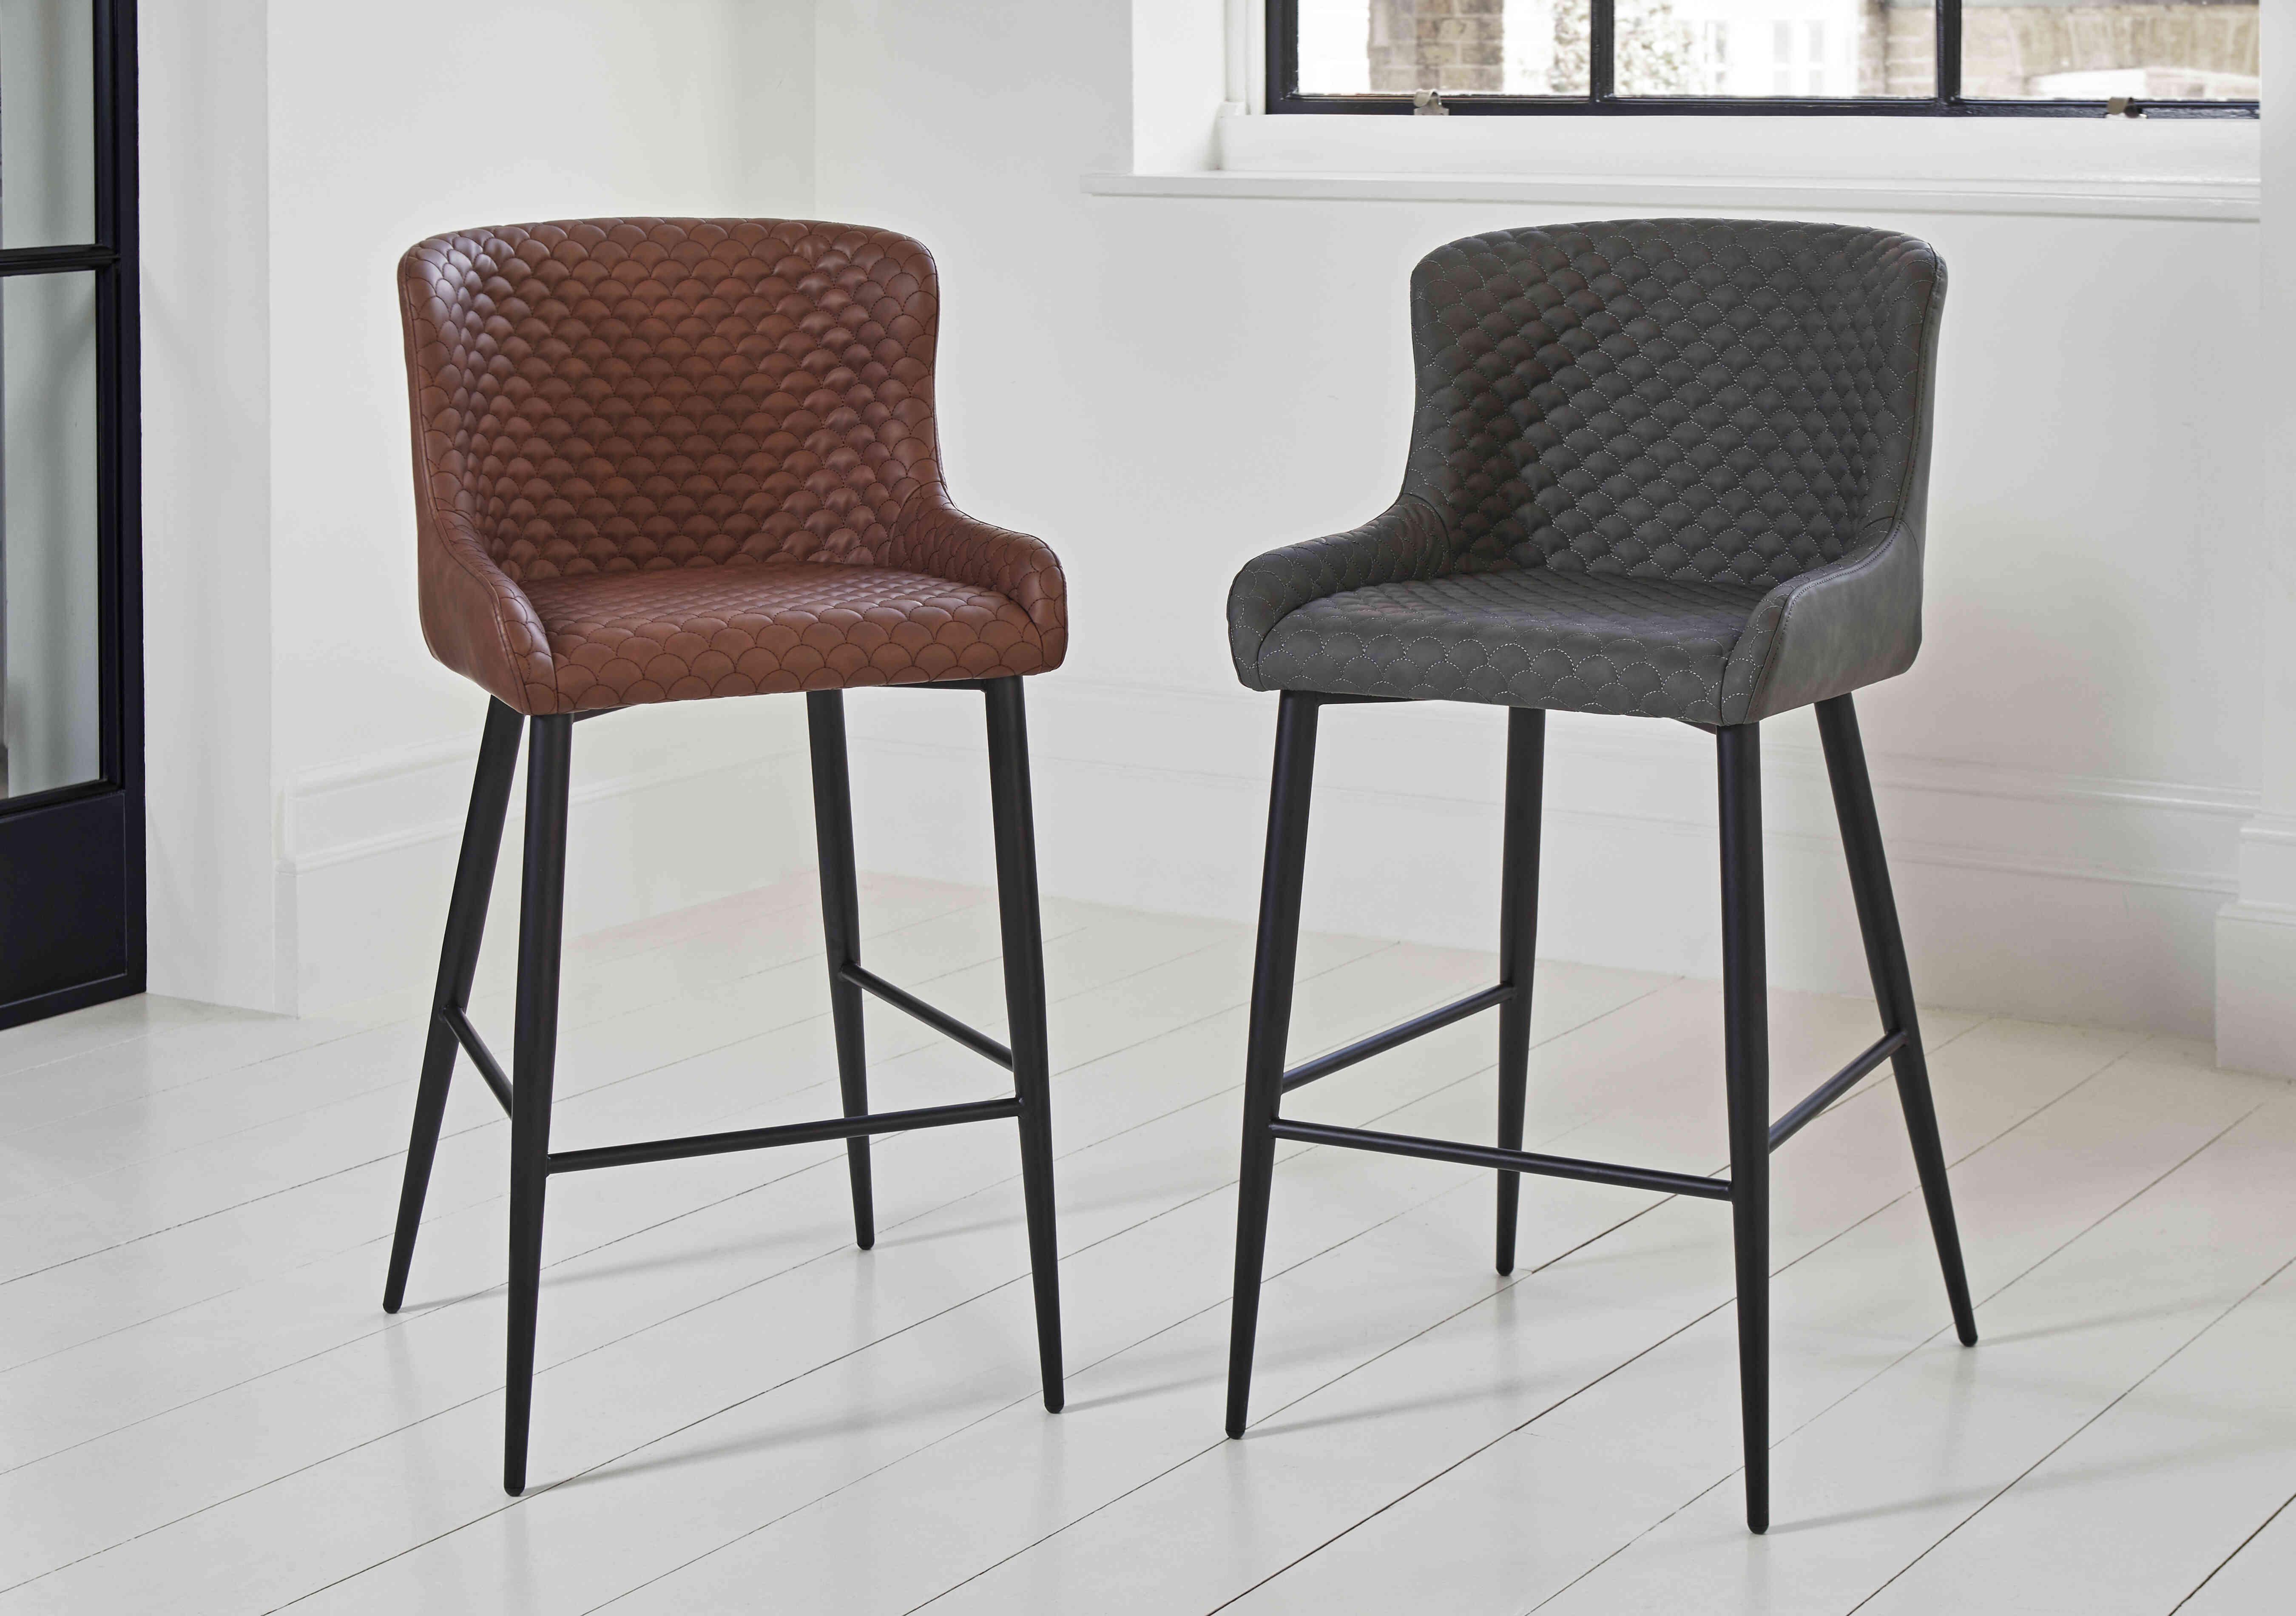 Hanoi Pair of Faux Leather Bar Stools in  on Furniture Village